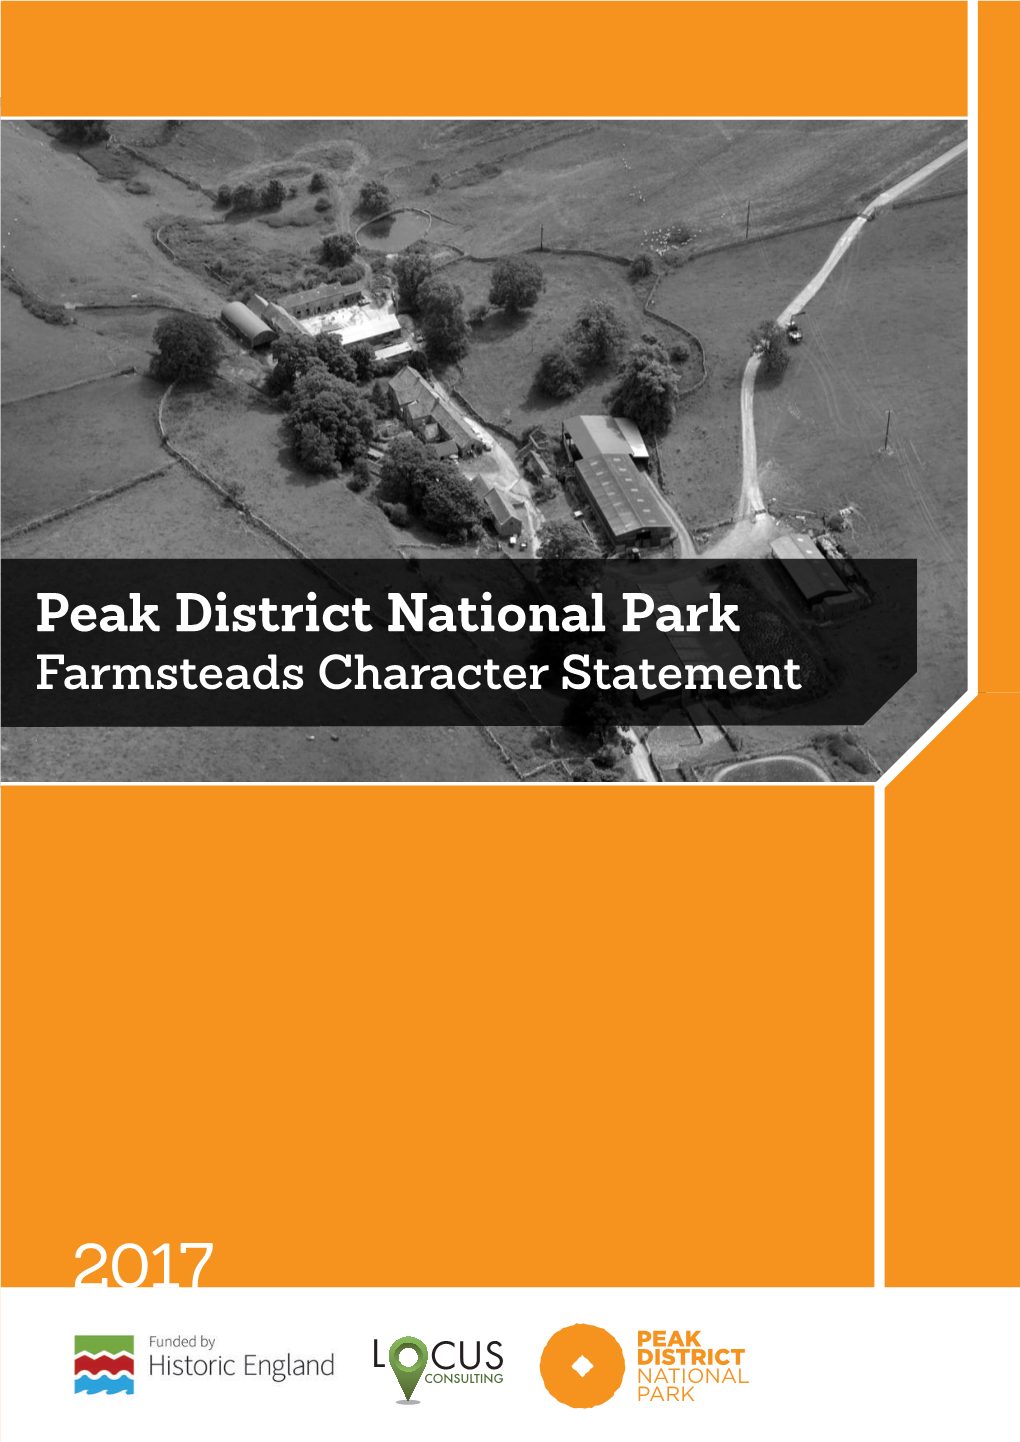 Summary of Peak District Farmsteads Character